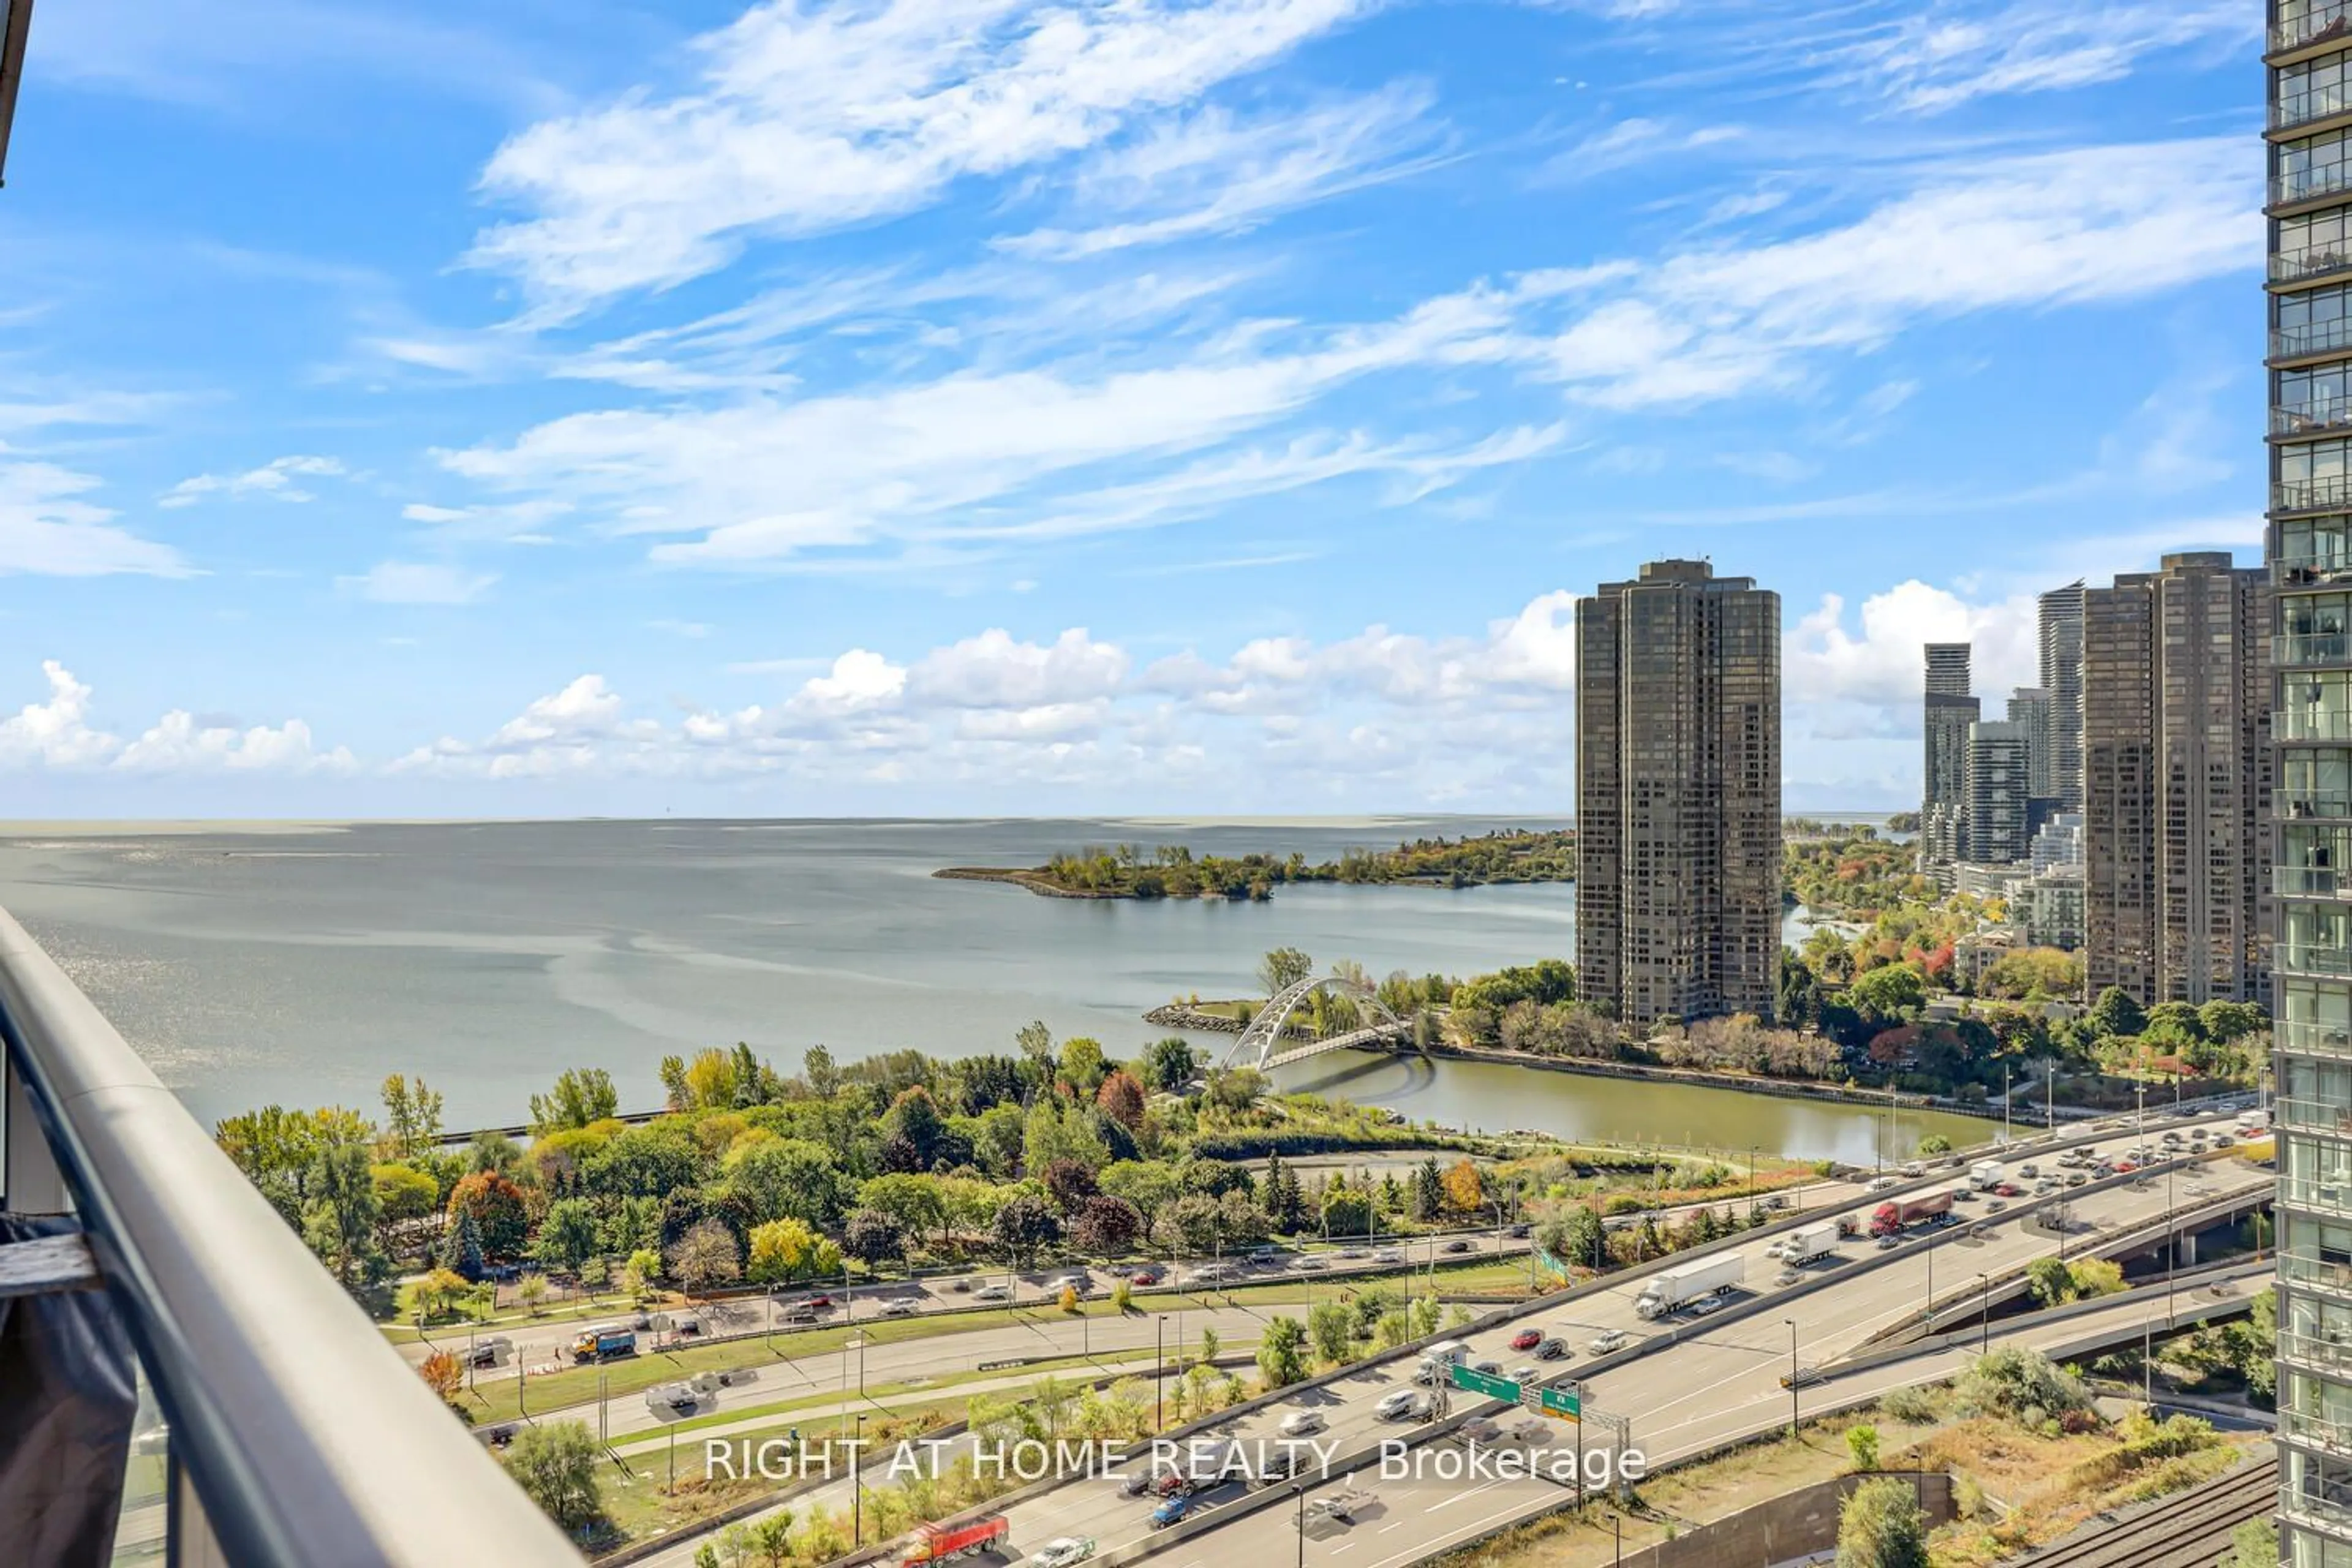 Lakeview for 103 The Queensway #2410, Toronto Ontario M6S 5B3